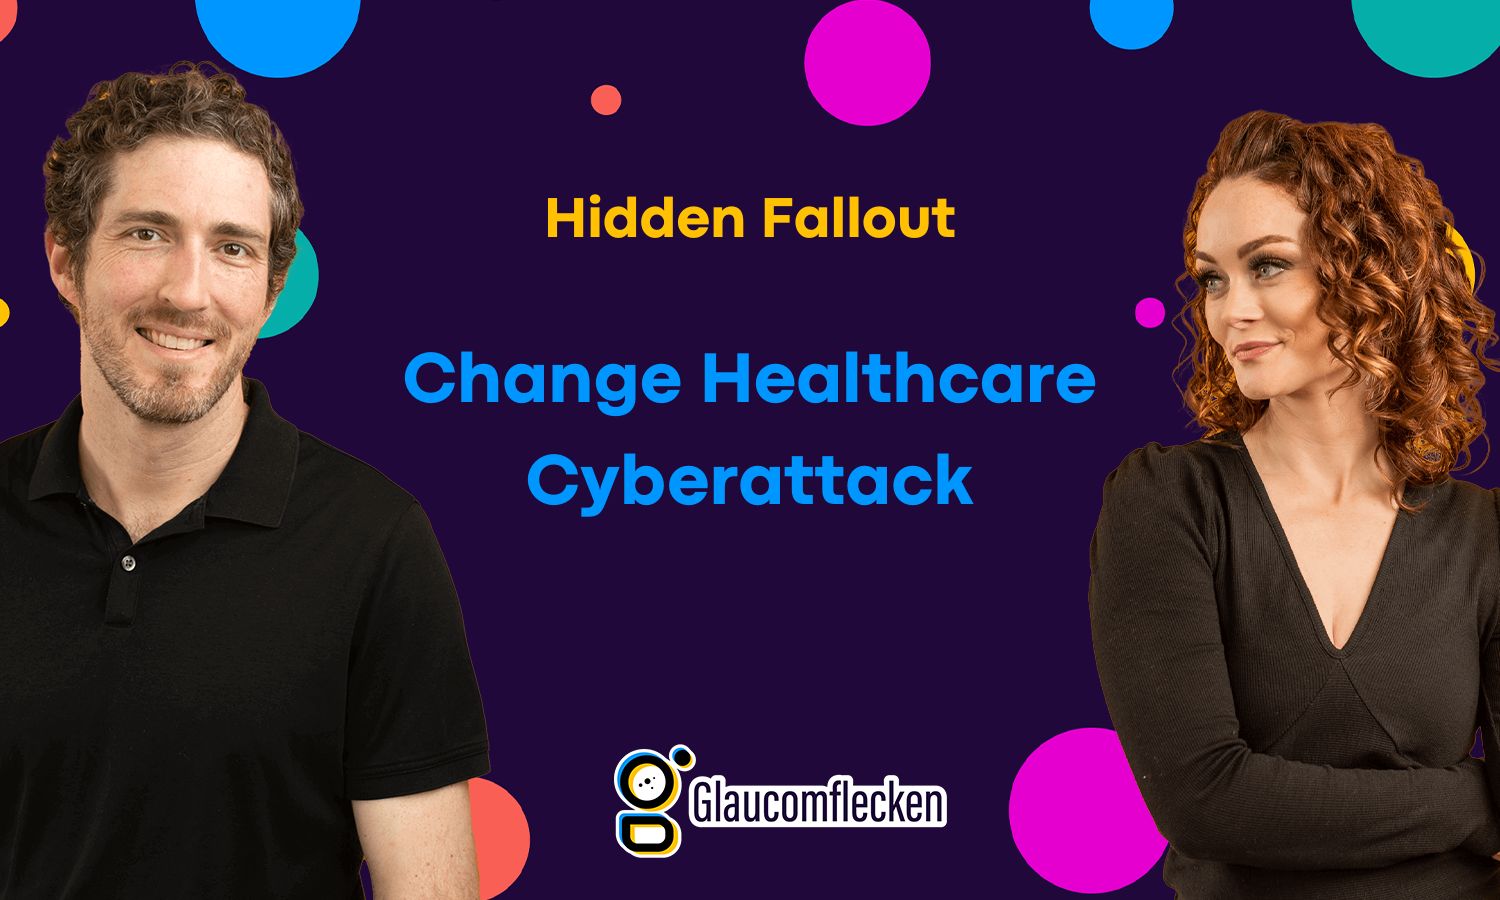 The Hidden Fallout: How The Change Healthcare Cyberattack Is Impacting Healthcare